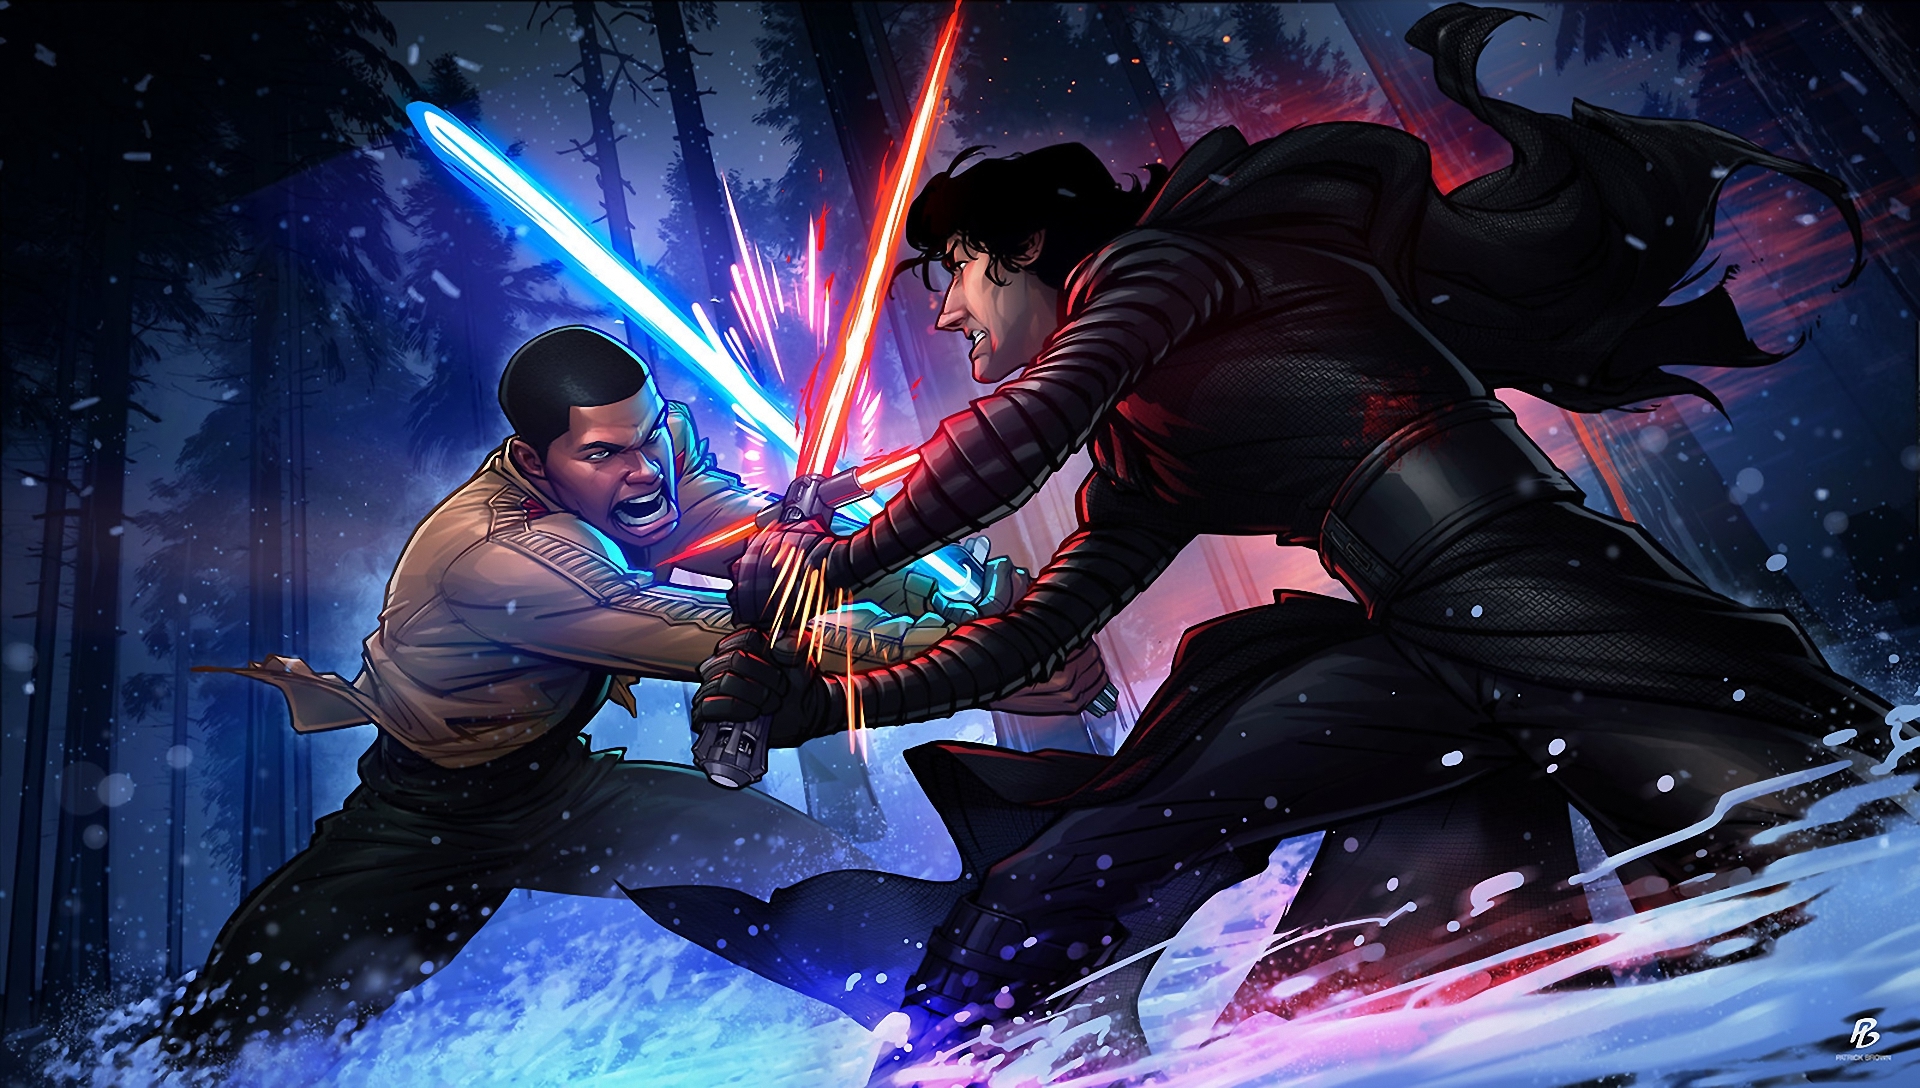 Star Wars: The Force Awakens by Patrick Brown